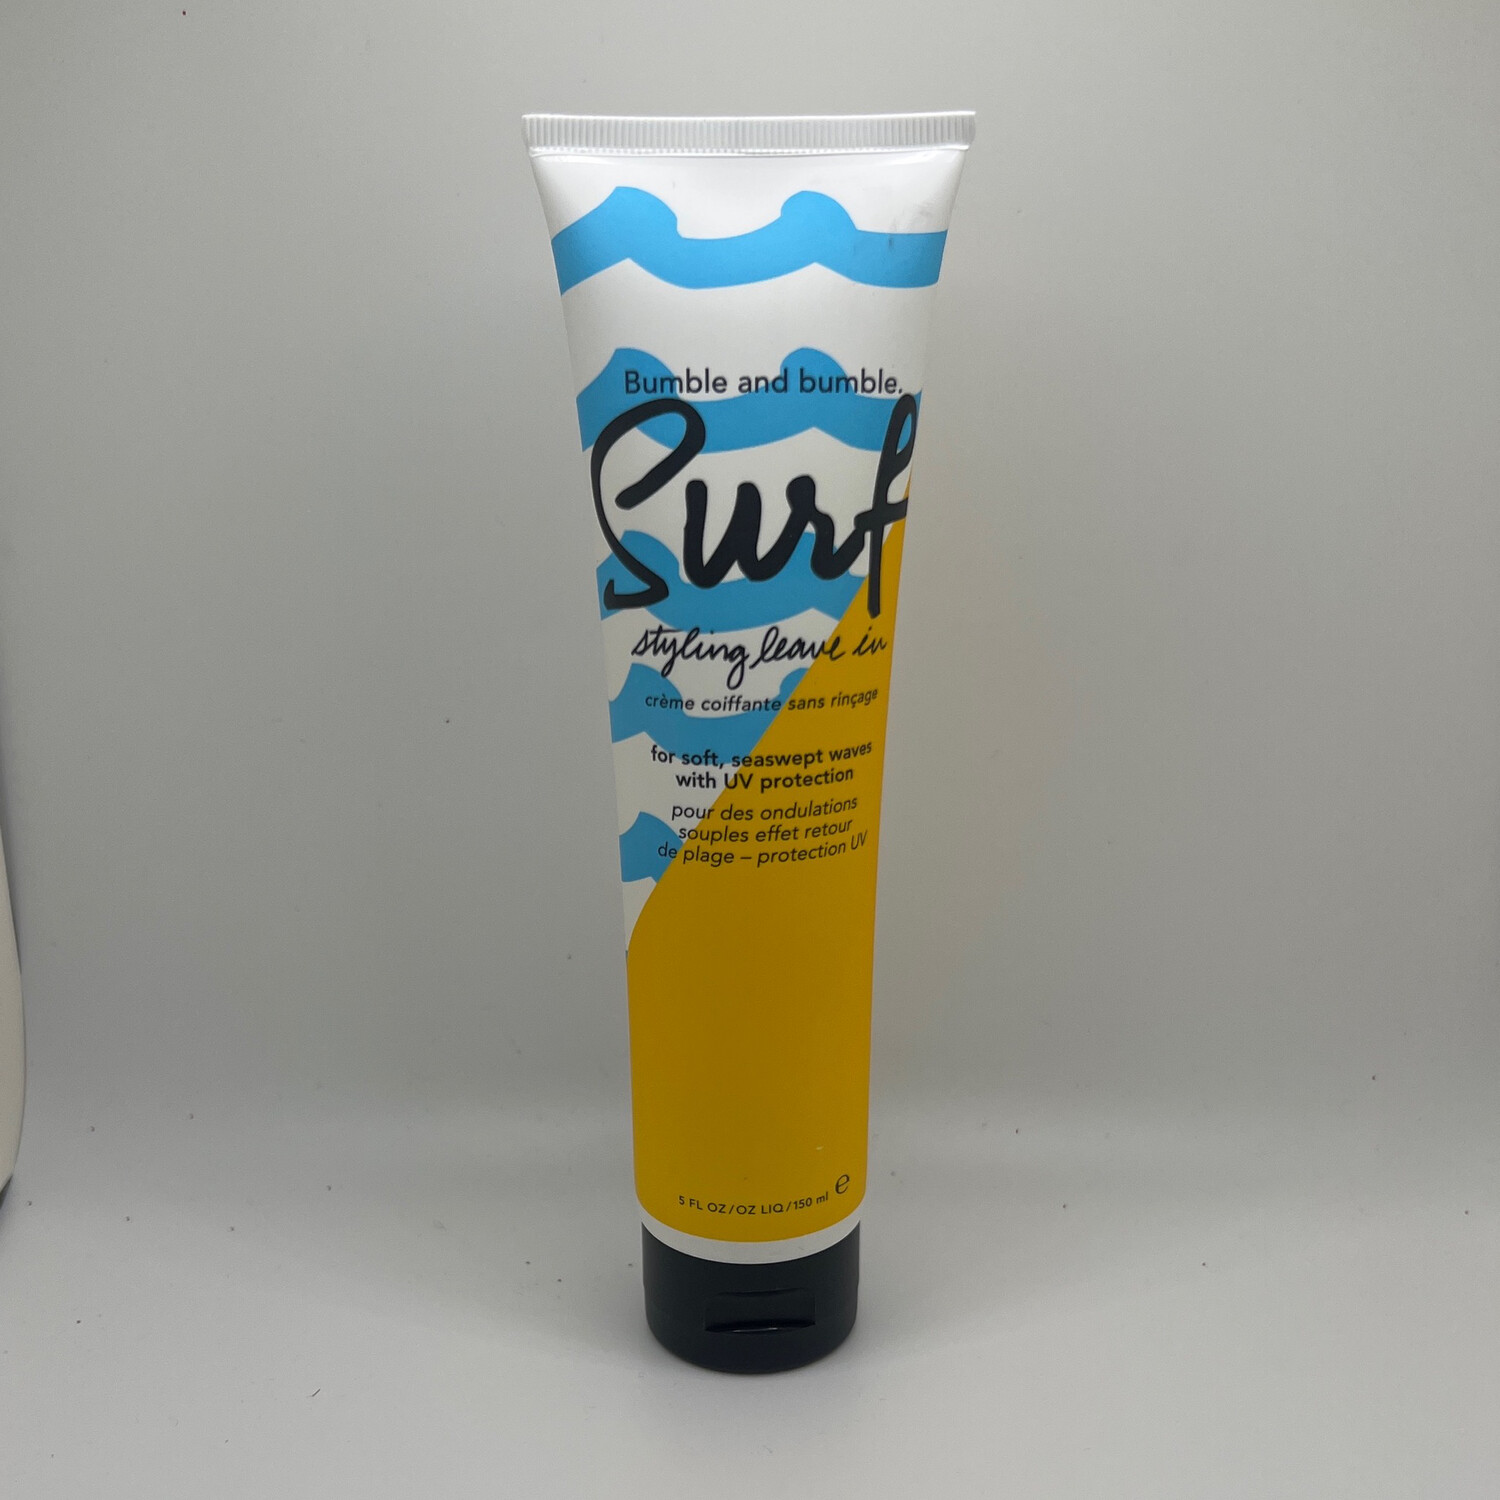 Bumble and Bumble- Surf styling leave in